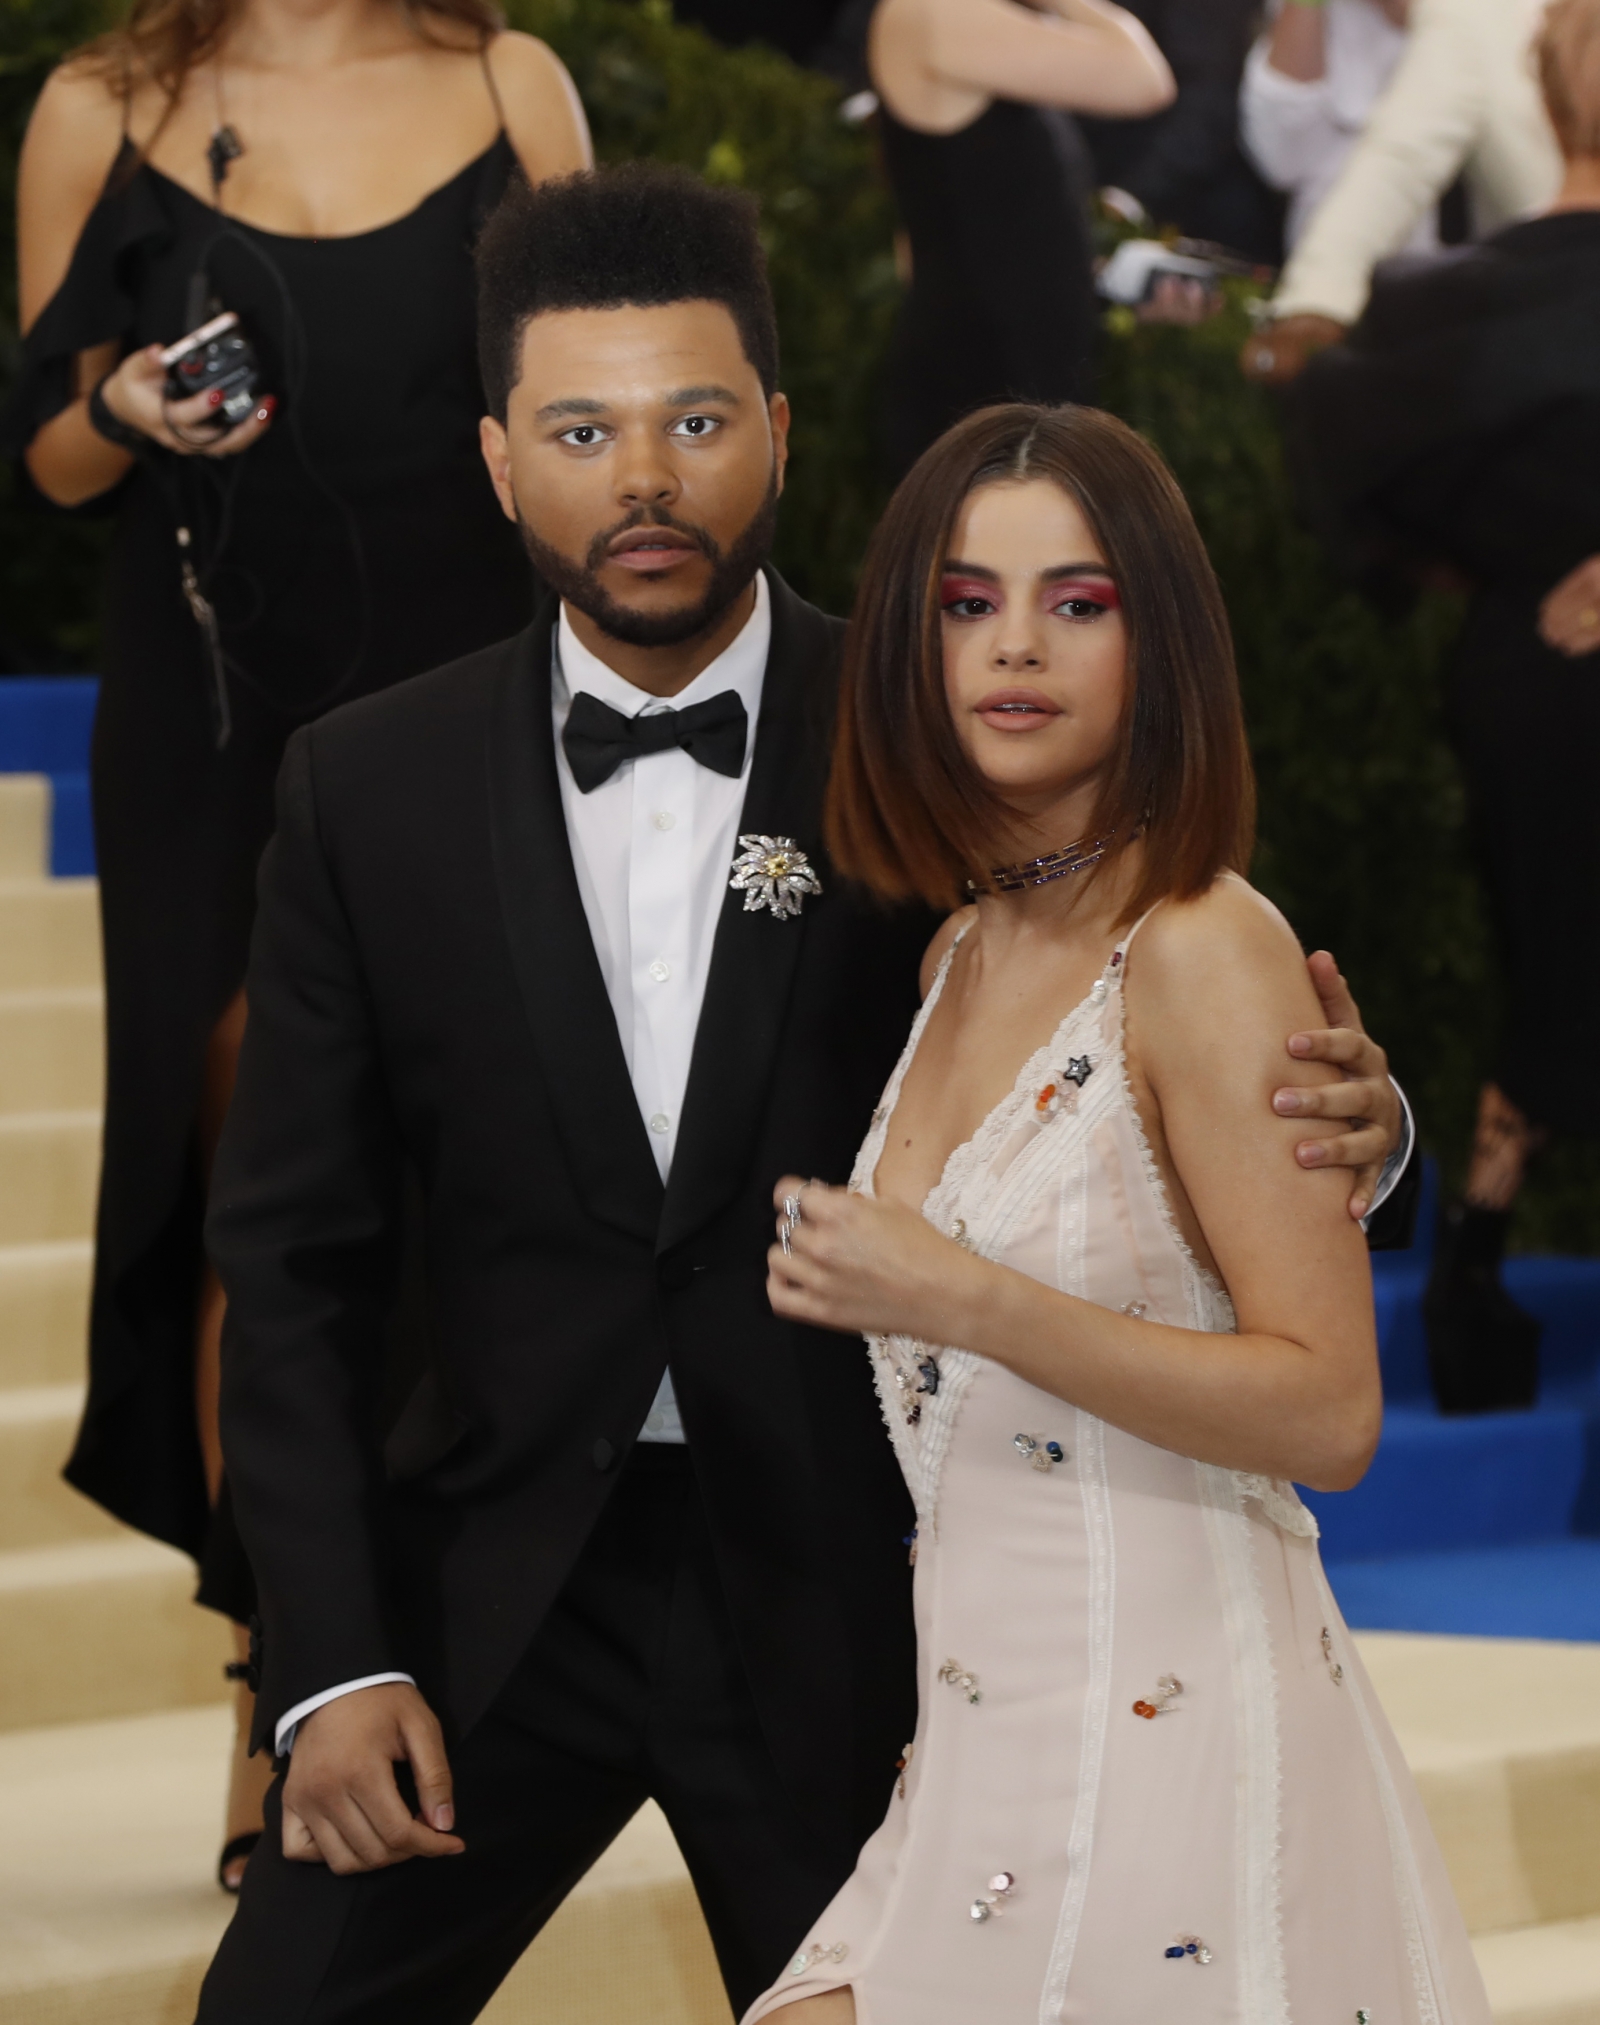 Met Gala 2017: Selena Gomez and The Weeknd kiss during red carpet